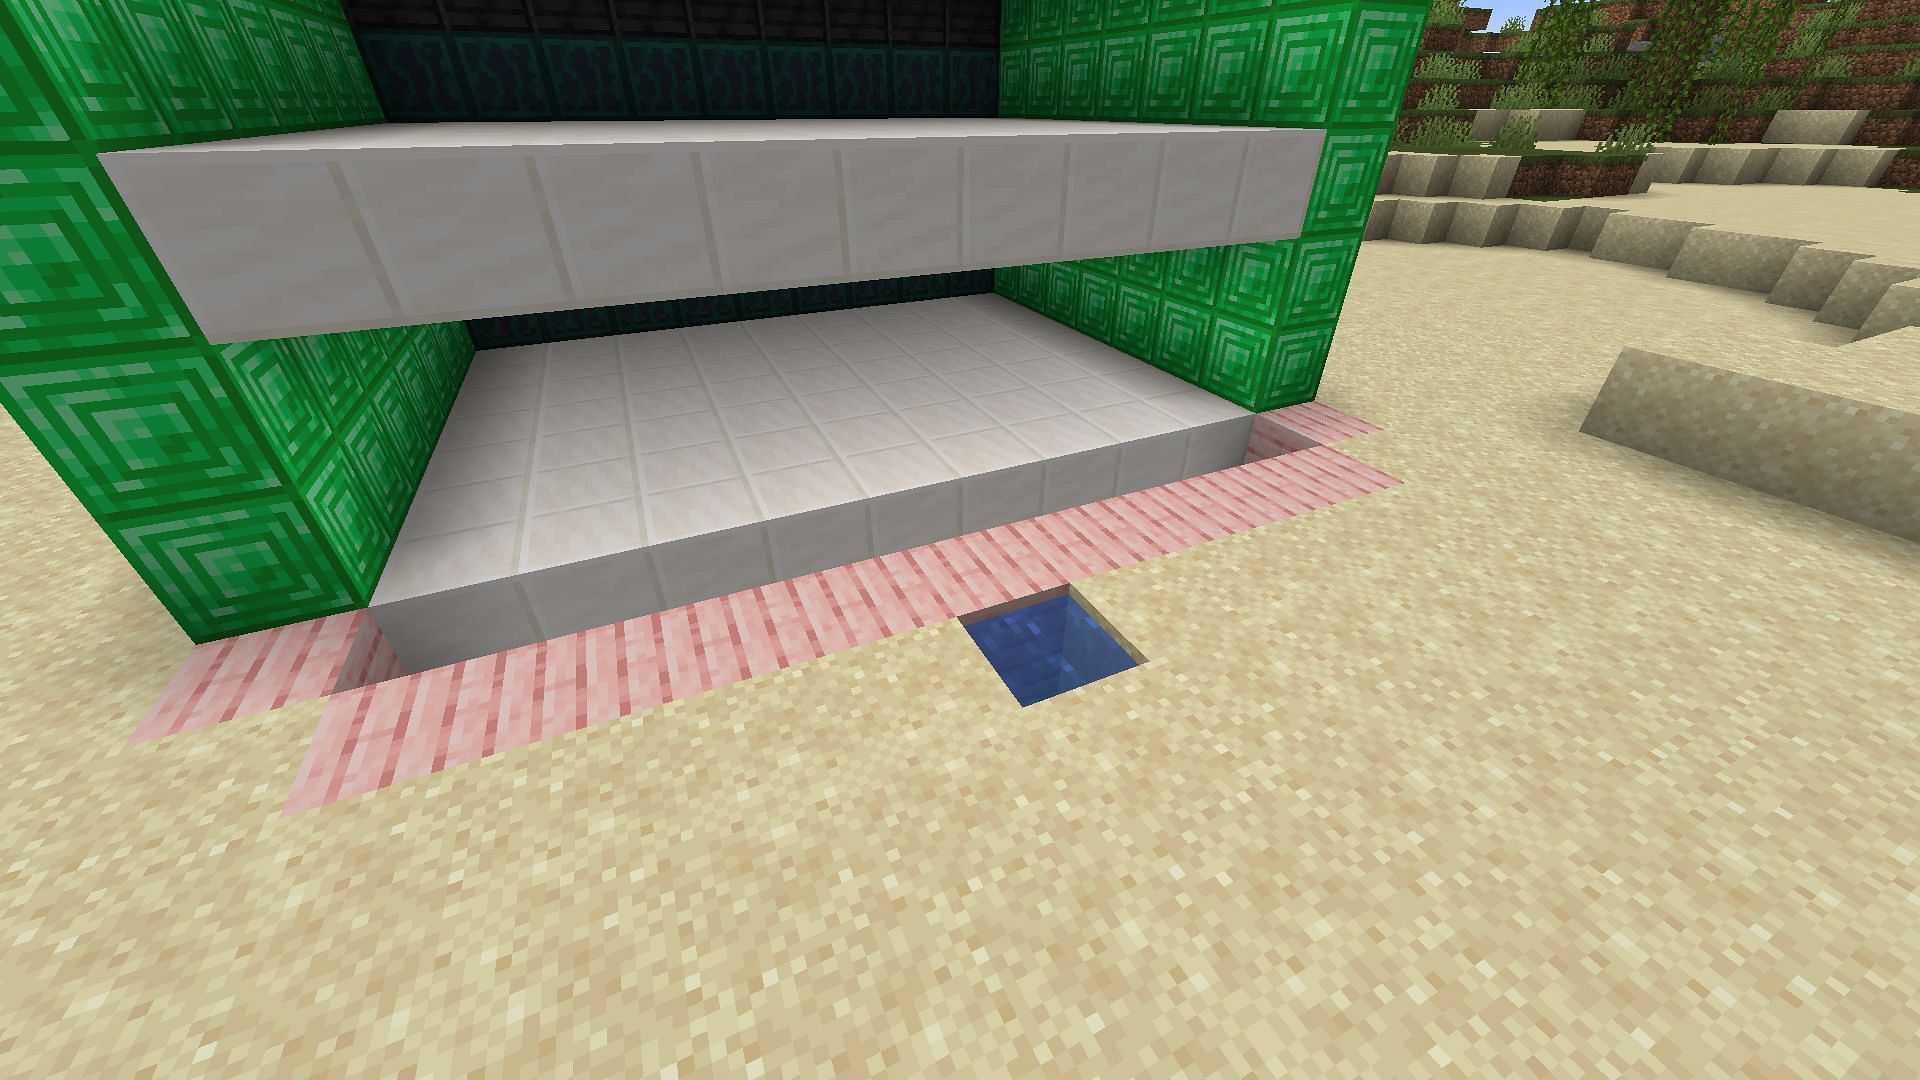 The water entryway from the surface level of this Minecraft build (Image via Mojang)